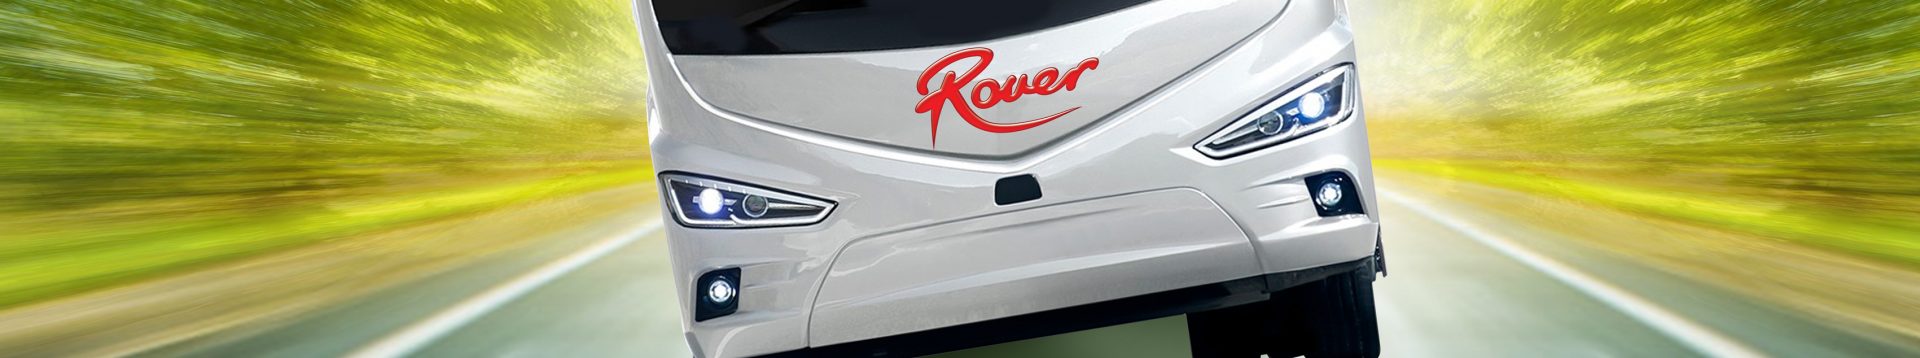 Rover Coaches banner for promotion